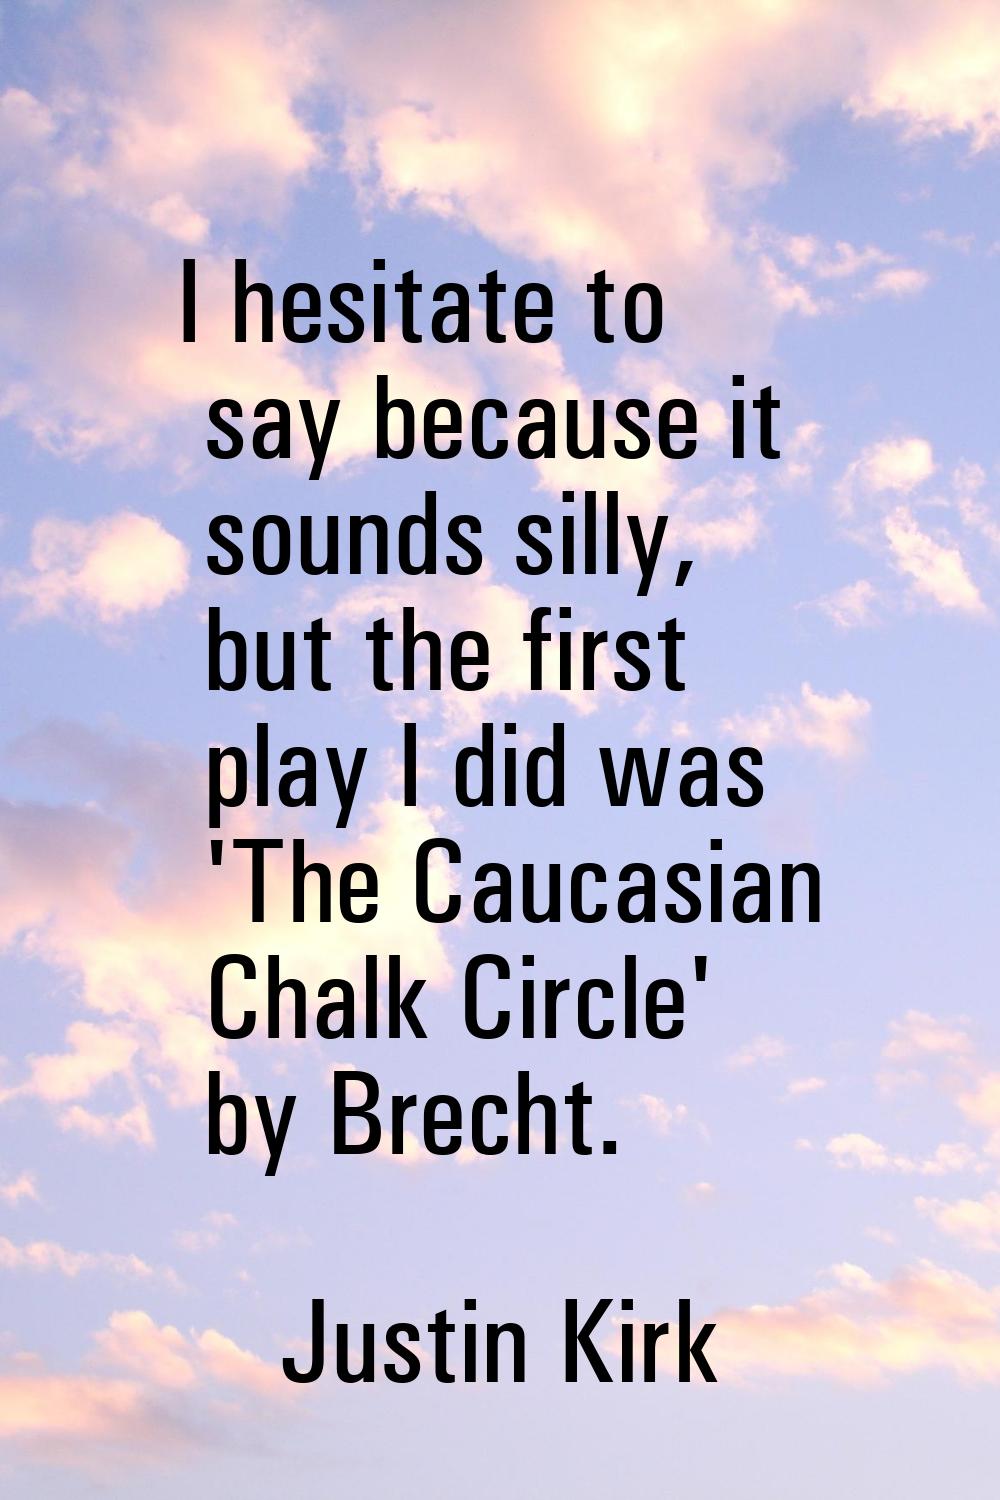 I hesitate to say because it sounds silly, but the first play I did was 'The Caucasian Chalk Circle